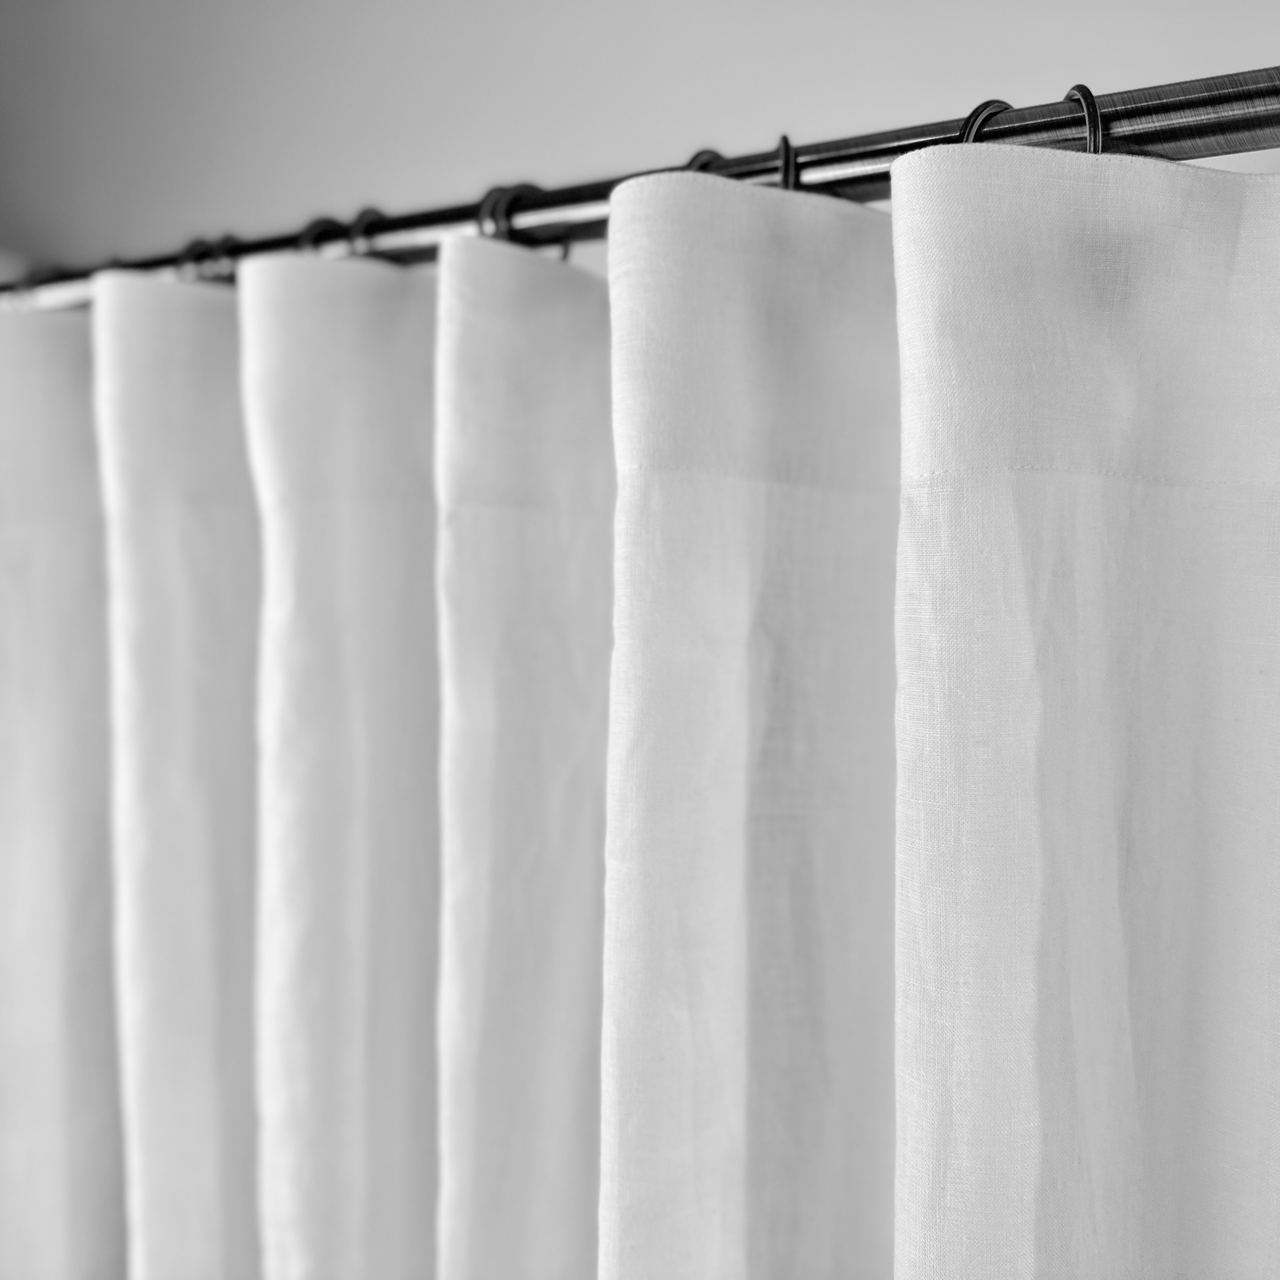 S-fold Linen Curtain Panel - Suitable for Rings and Hooks or Track - Unlined Linen Curtain